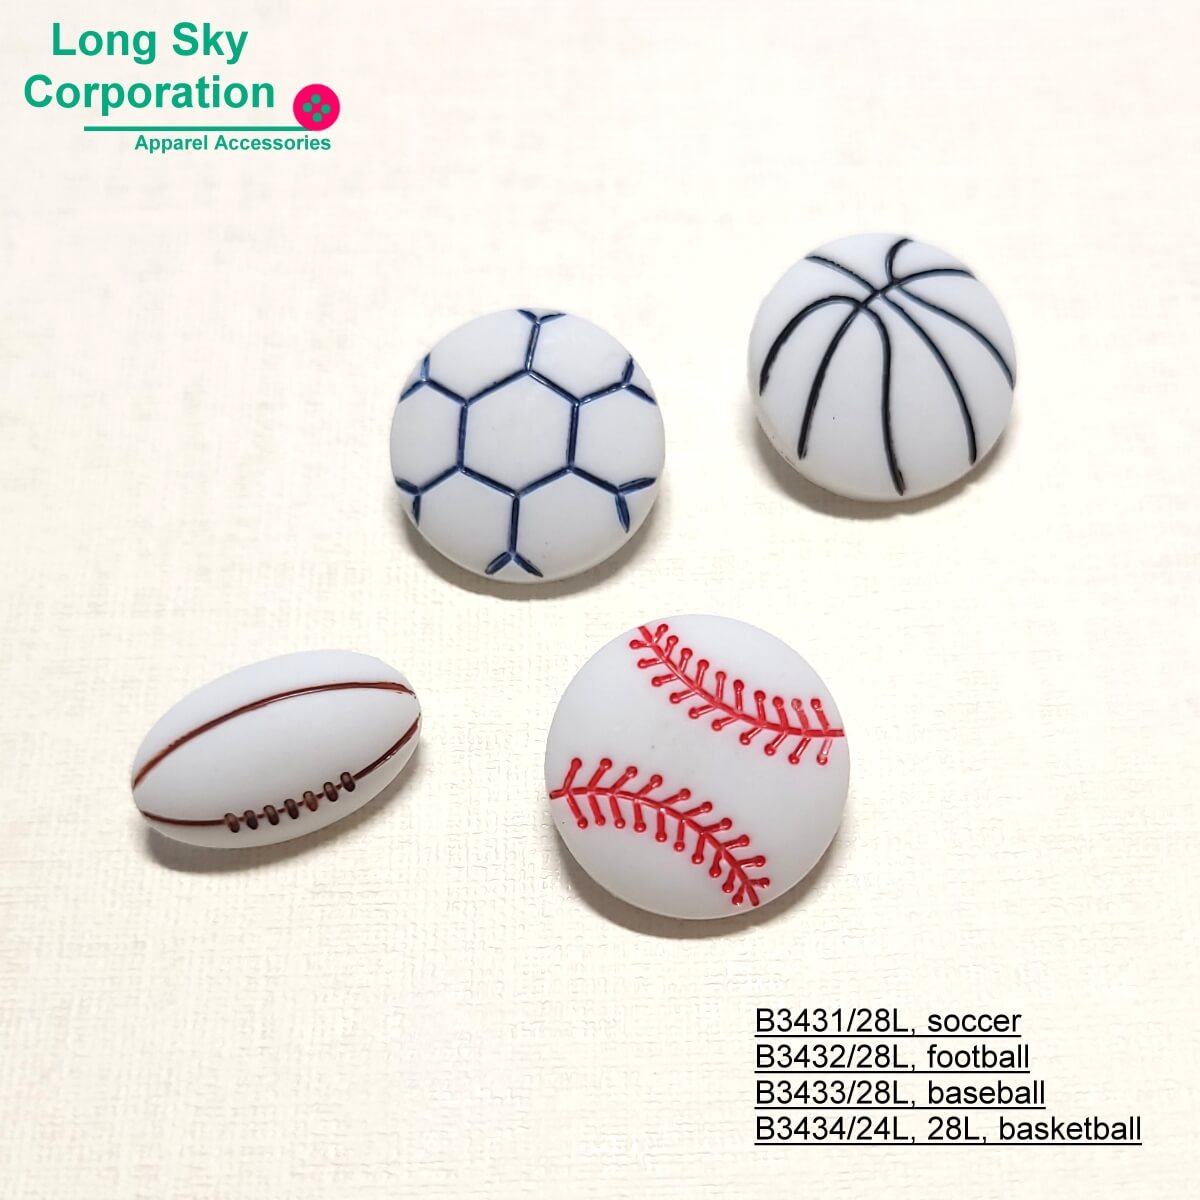 (#B3434) 24L 28L colored basketball jacket button, baby wear button